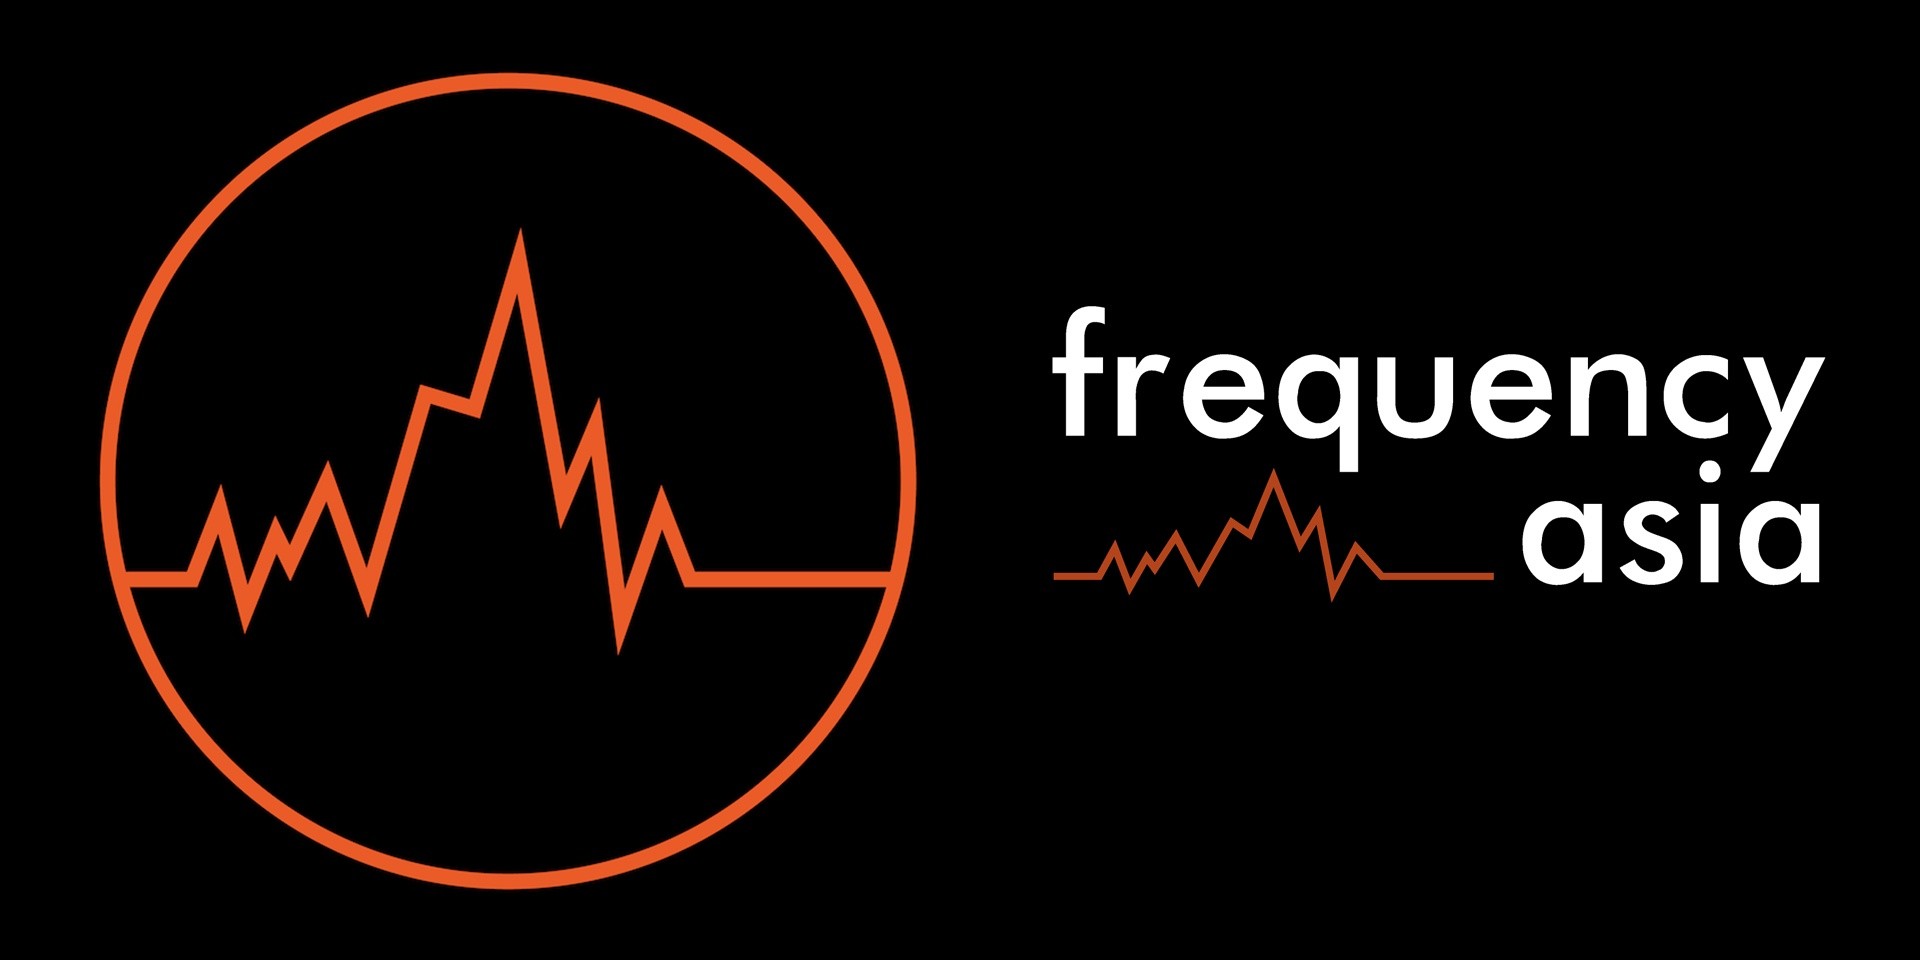 Frequency Asia is keeping tabs to bring you the best music in Asia